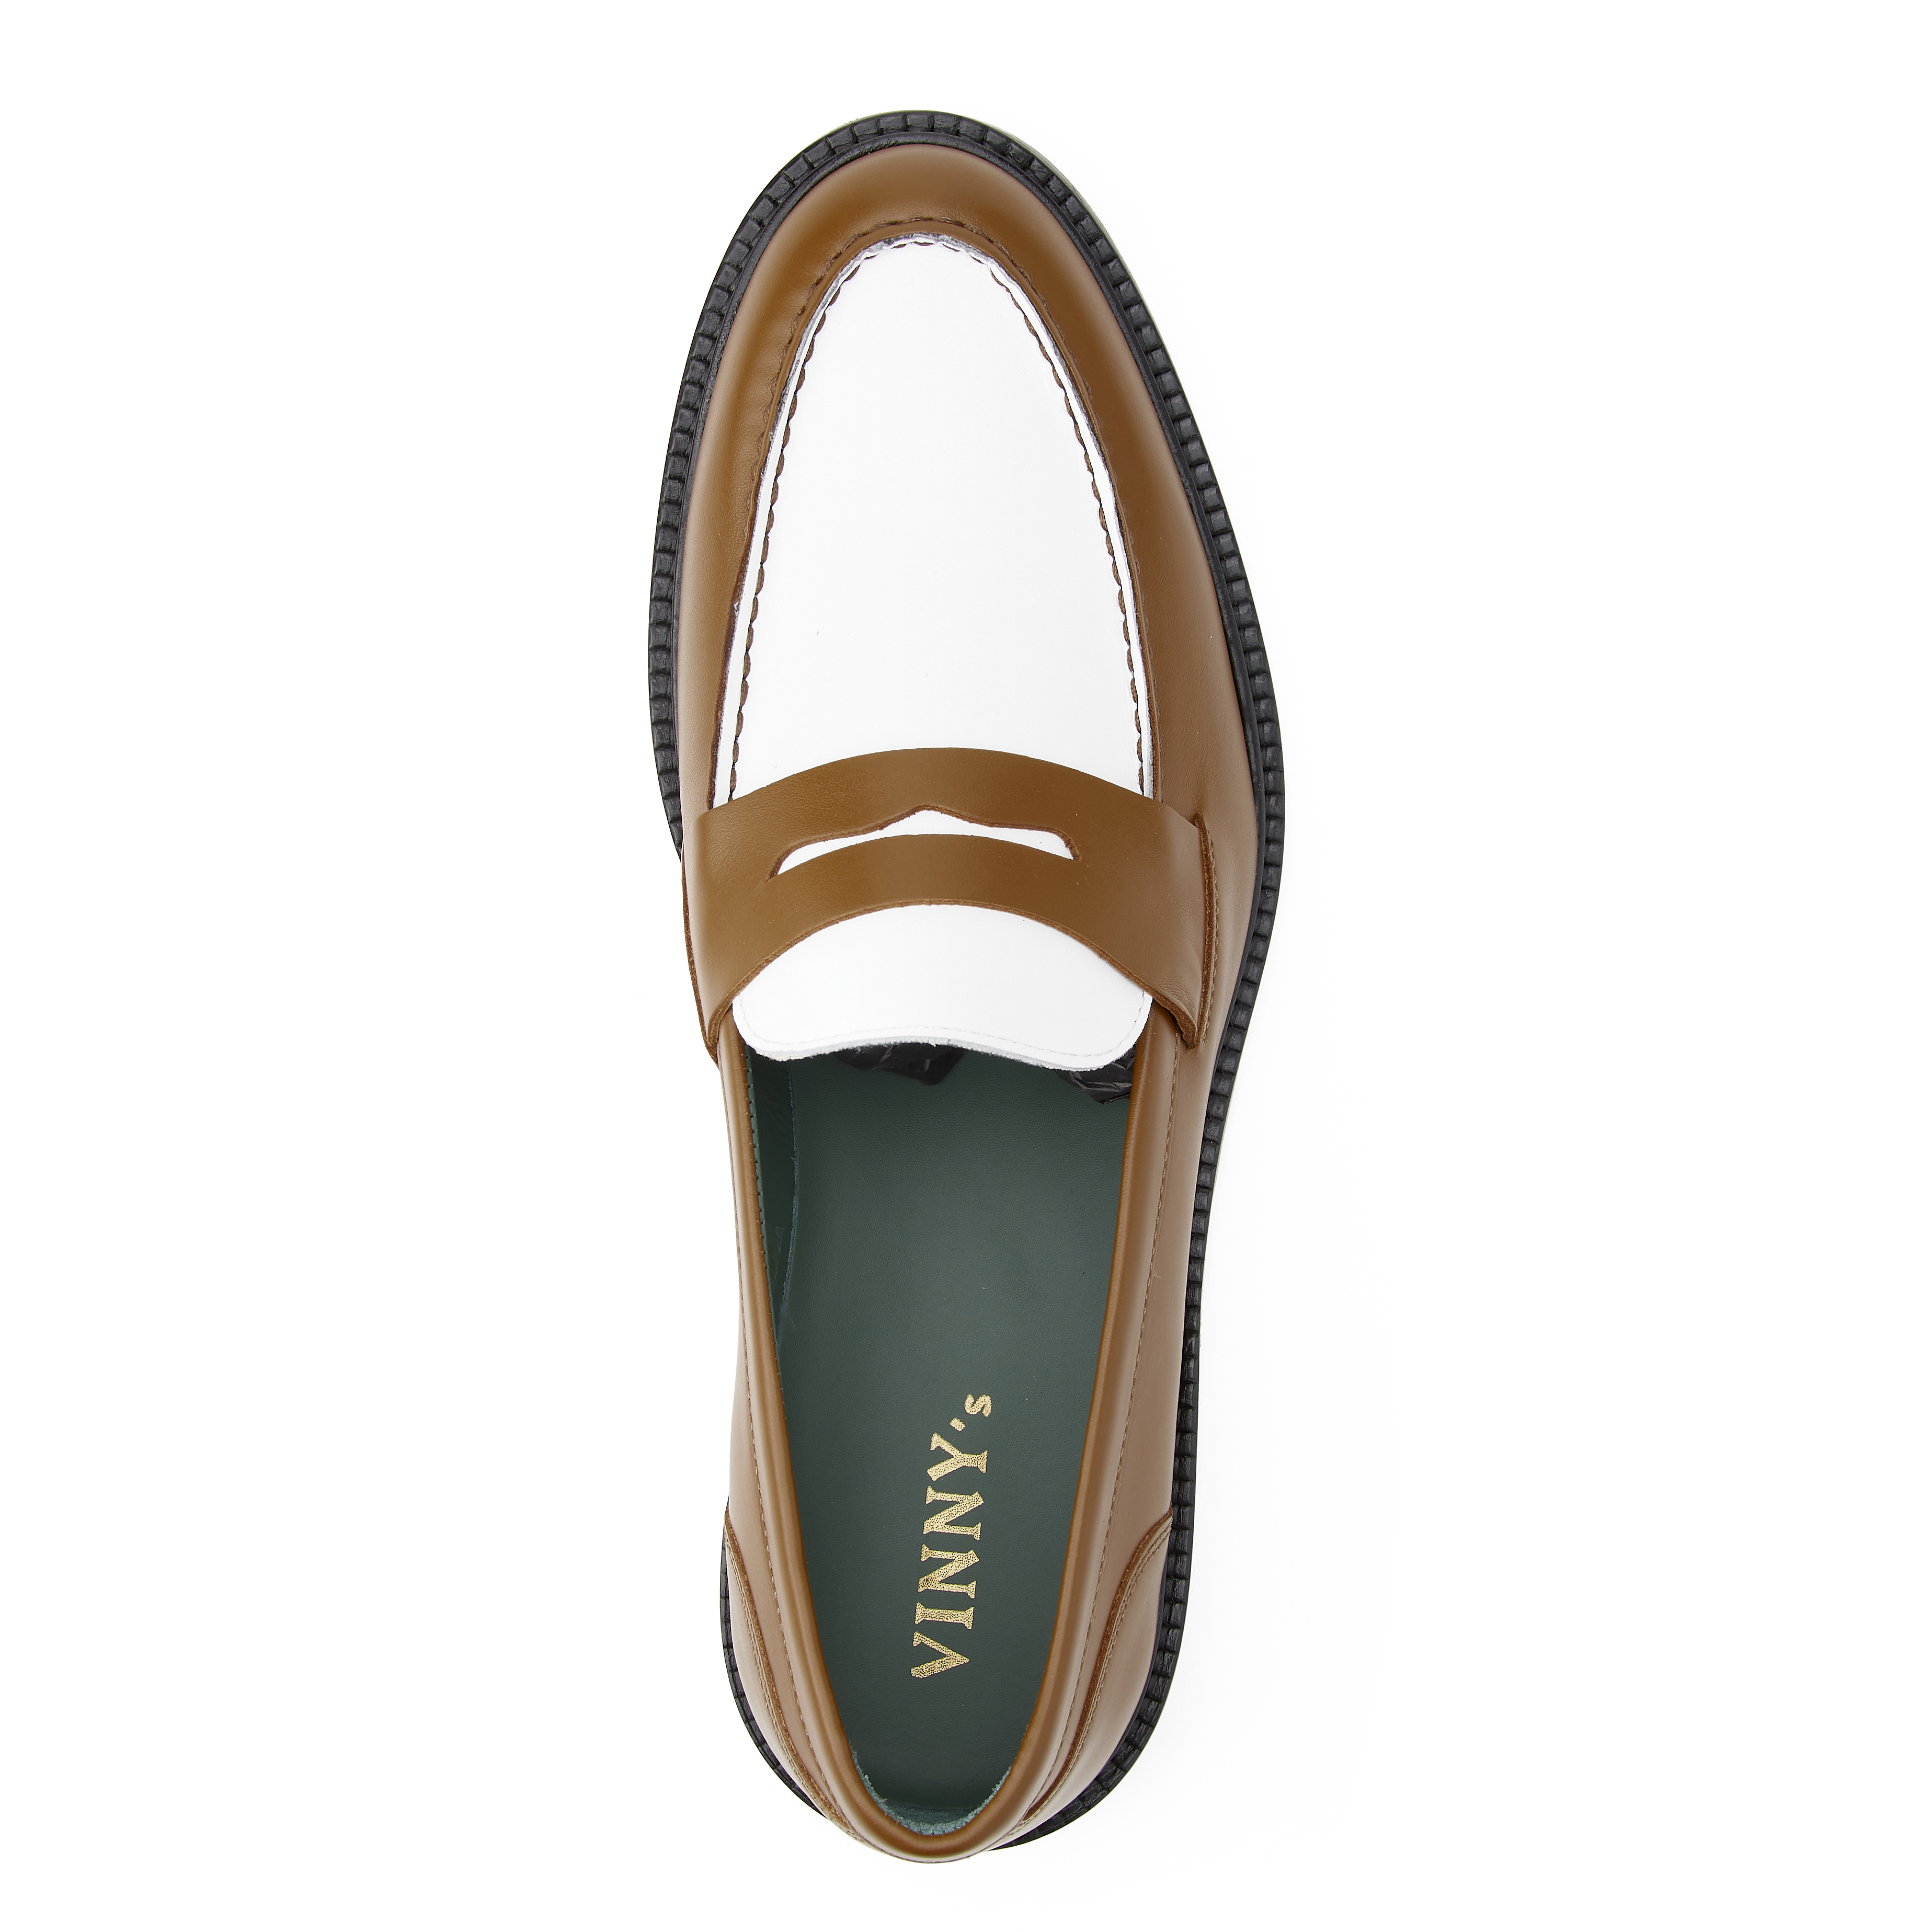 Vinny's Townee Two-Tone Penny Loafer - Cognac Leather | Loafers ...